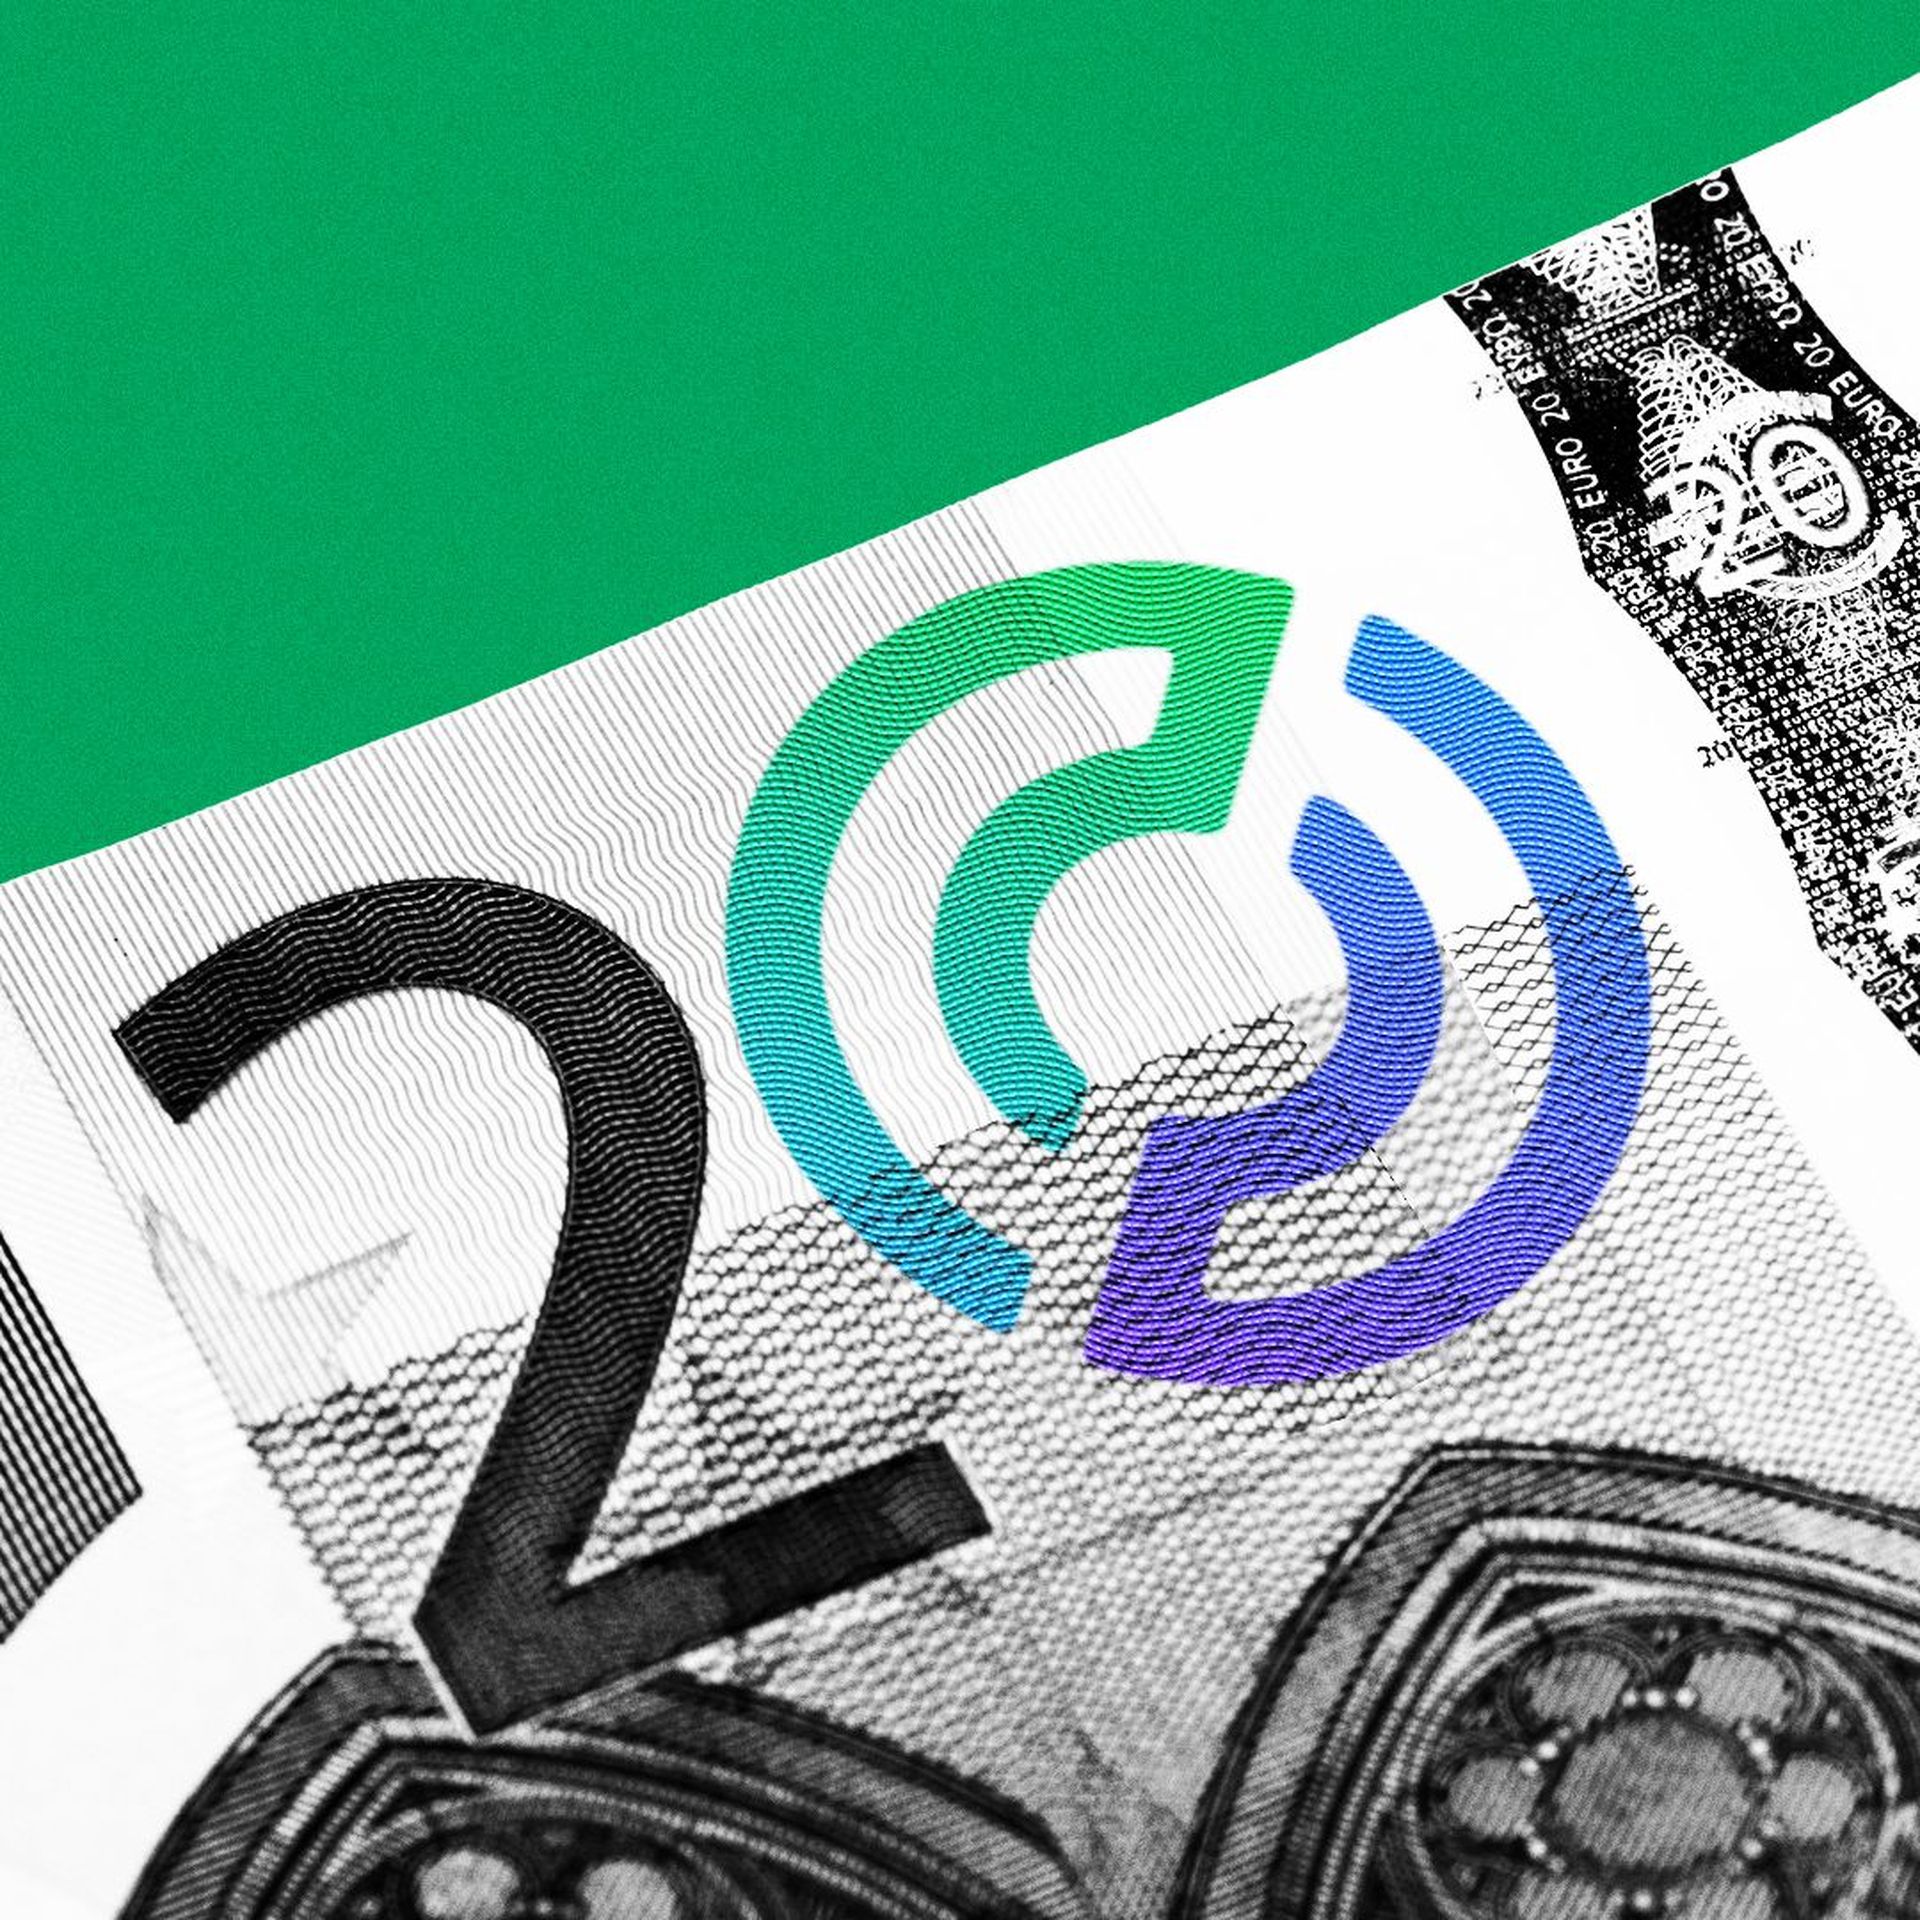 Illustration of the zero on a euro bill replaced with the logo for Circle Internet Financial.